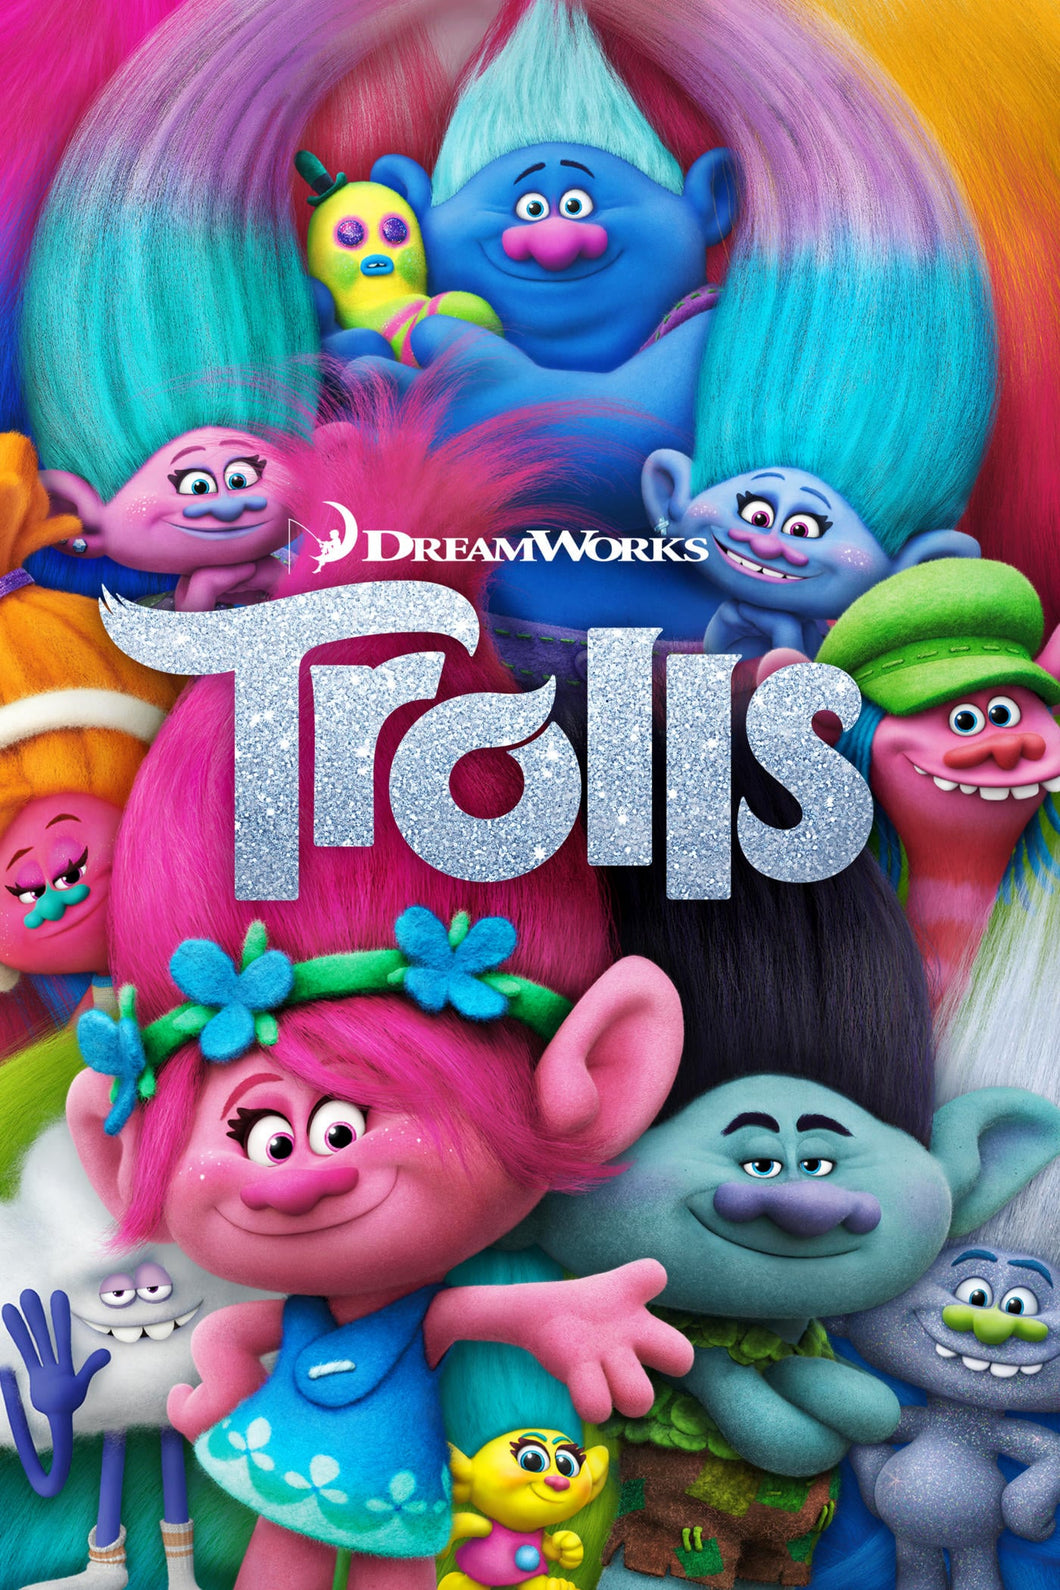 Trolls (2016) Animated Movie Poster Framed or Unframed Glossy Poster Free UK Shipping!!!